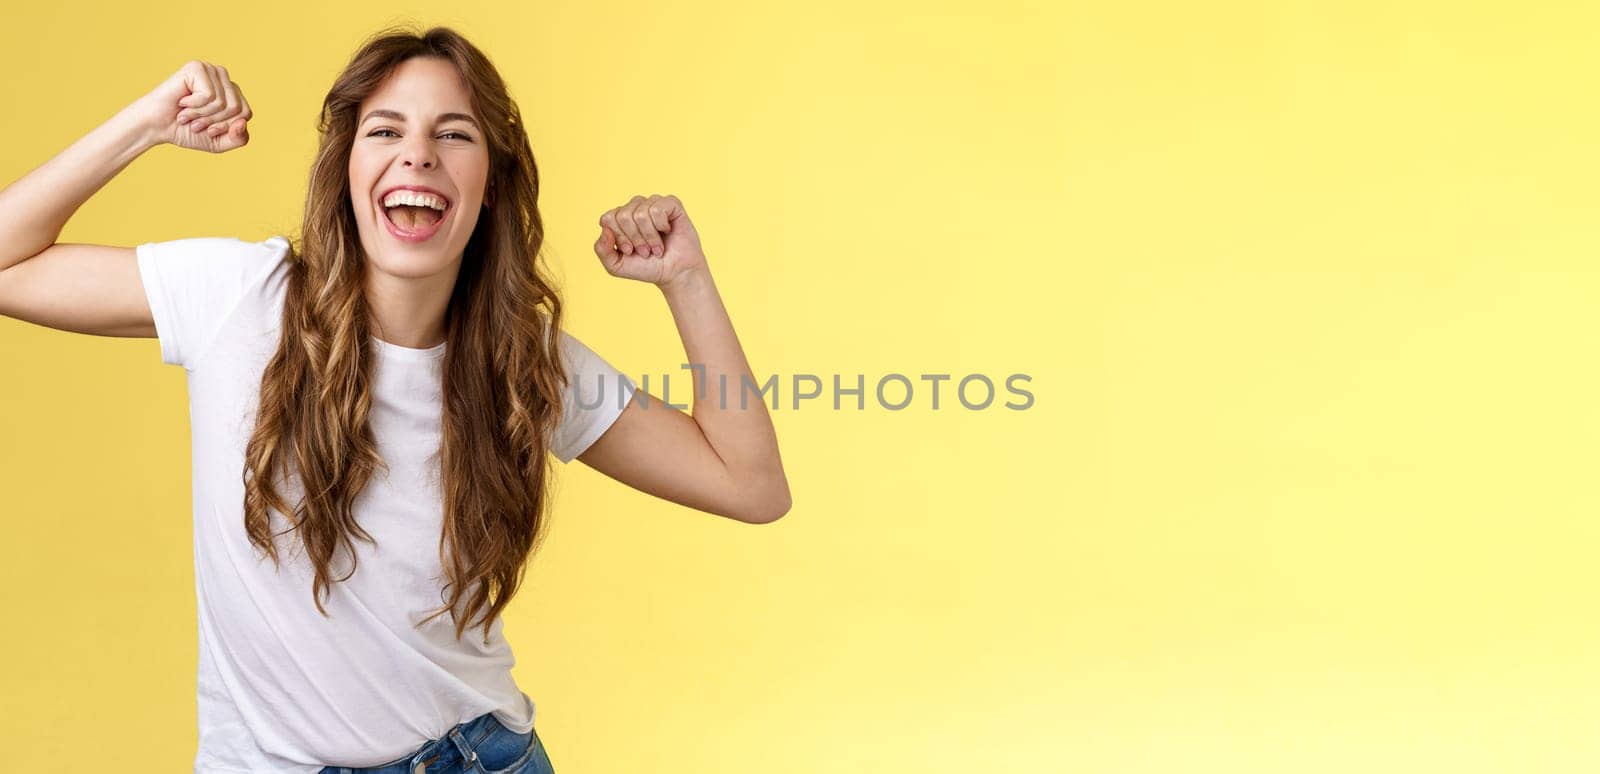 Girl thanks invitation awesome party having fun go wild raise hands up relaxed loose dancing lip sync cool music enjoying moment wear white t-shirt casual outfit celebrating yellow background. Lifestyle.